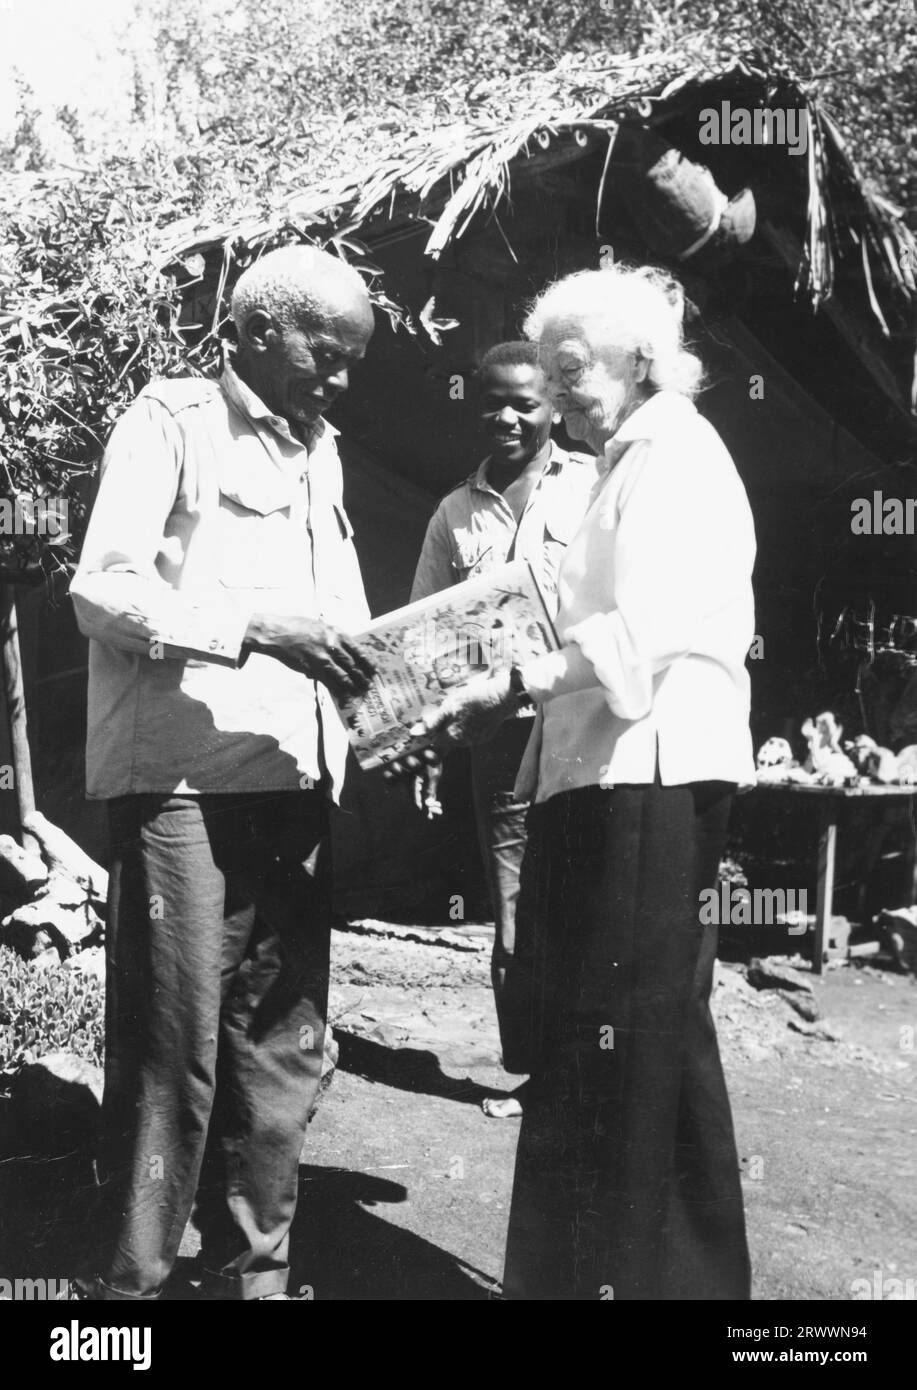 Kamante, once head servant and cook for Baroness Karen Blixen, shows his newly published book, 'Longing for Darkness', to Ingrid Lindstrom, a close friend of Blixen and the Grant family. The book reflects Blixen's (aka Isak Dinesen's) famous novel 'Out of Africa', in which Kamante is a character, but is written from Kamante's point of view and enhanced with drawings and letters. Kamante later played a small part as an elder in the television adaptation of The Flame Trees of Thika. Stock Photo